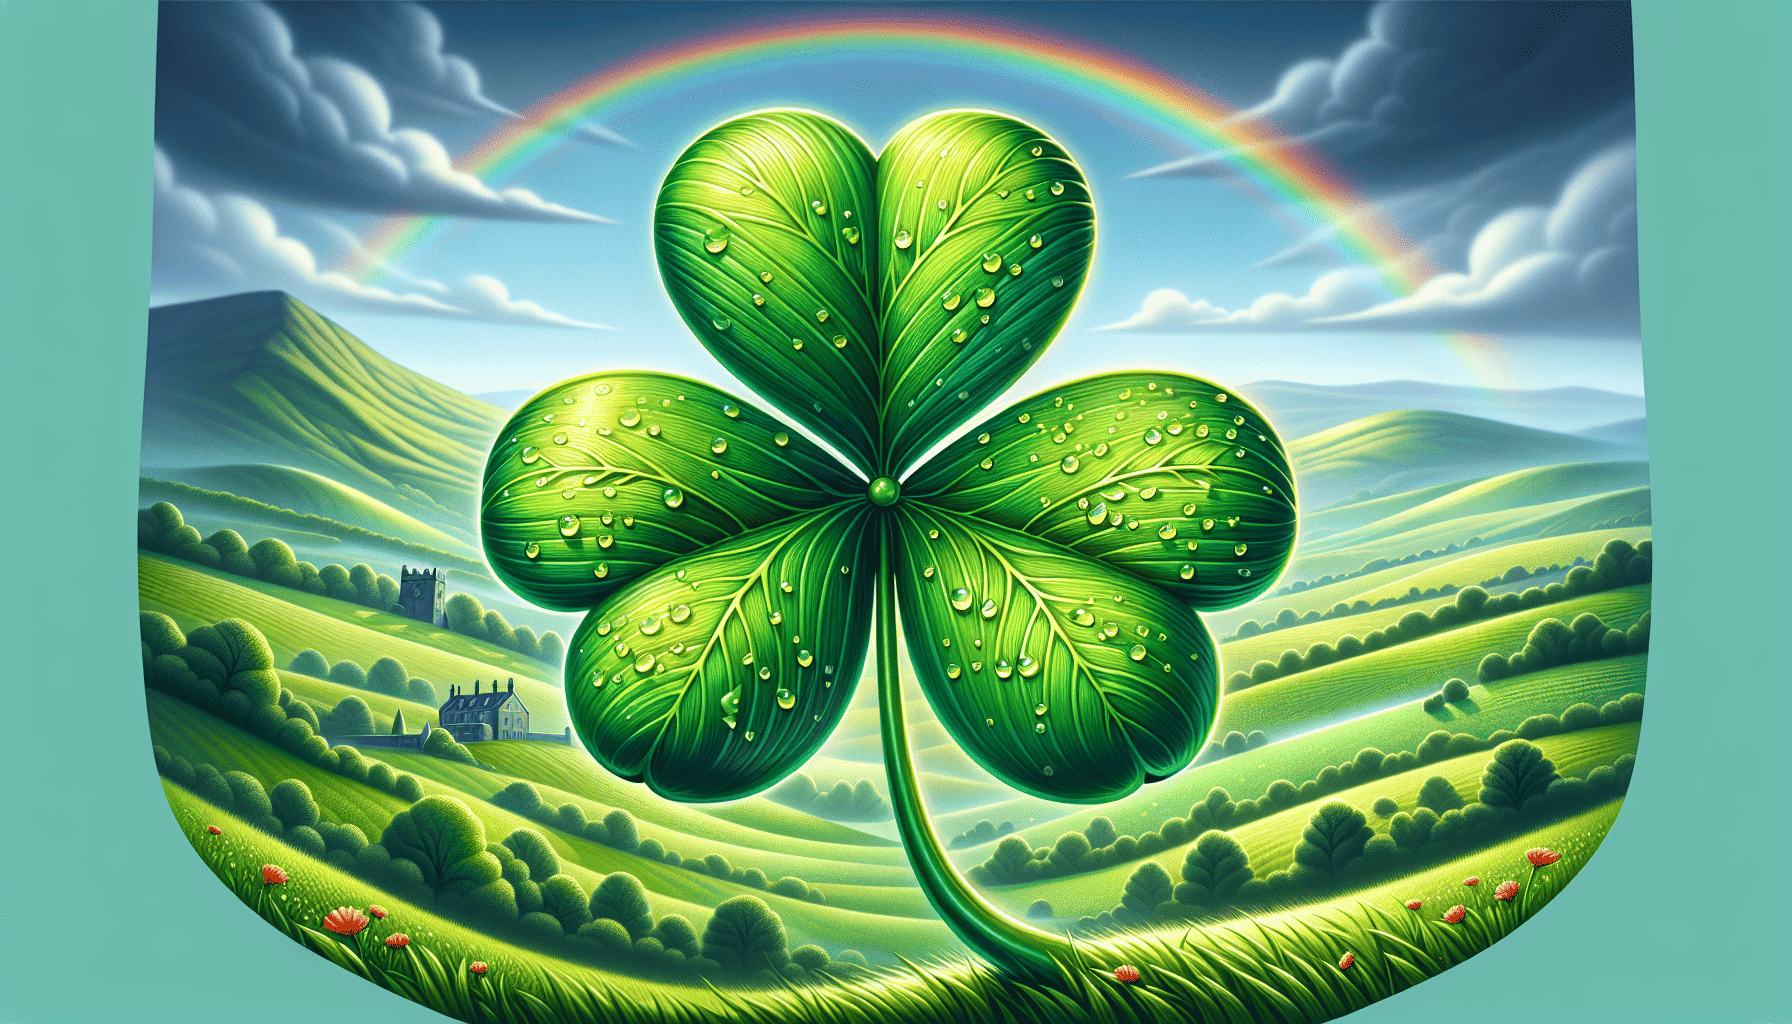 An illustration of a traditional green shamrock